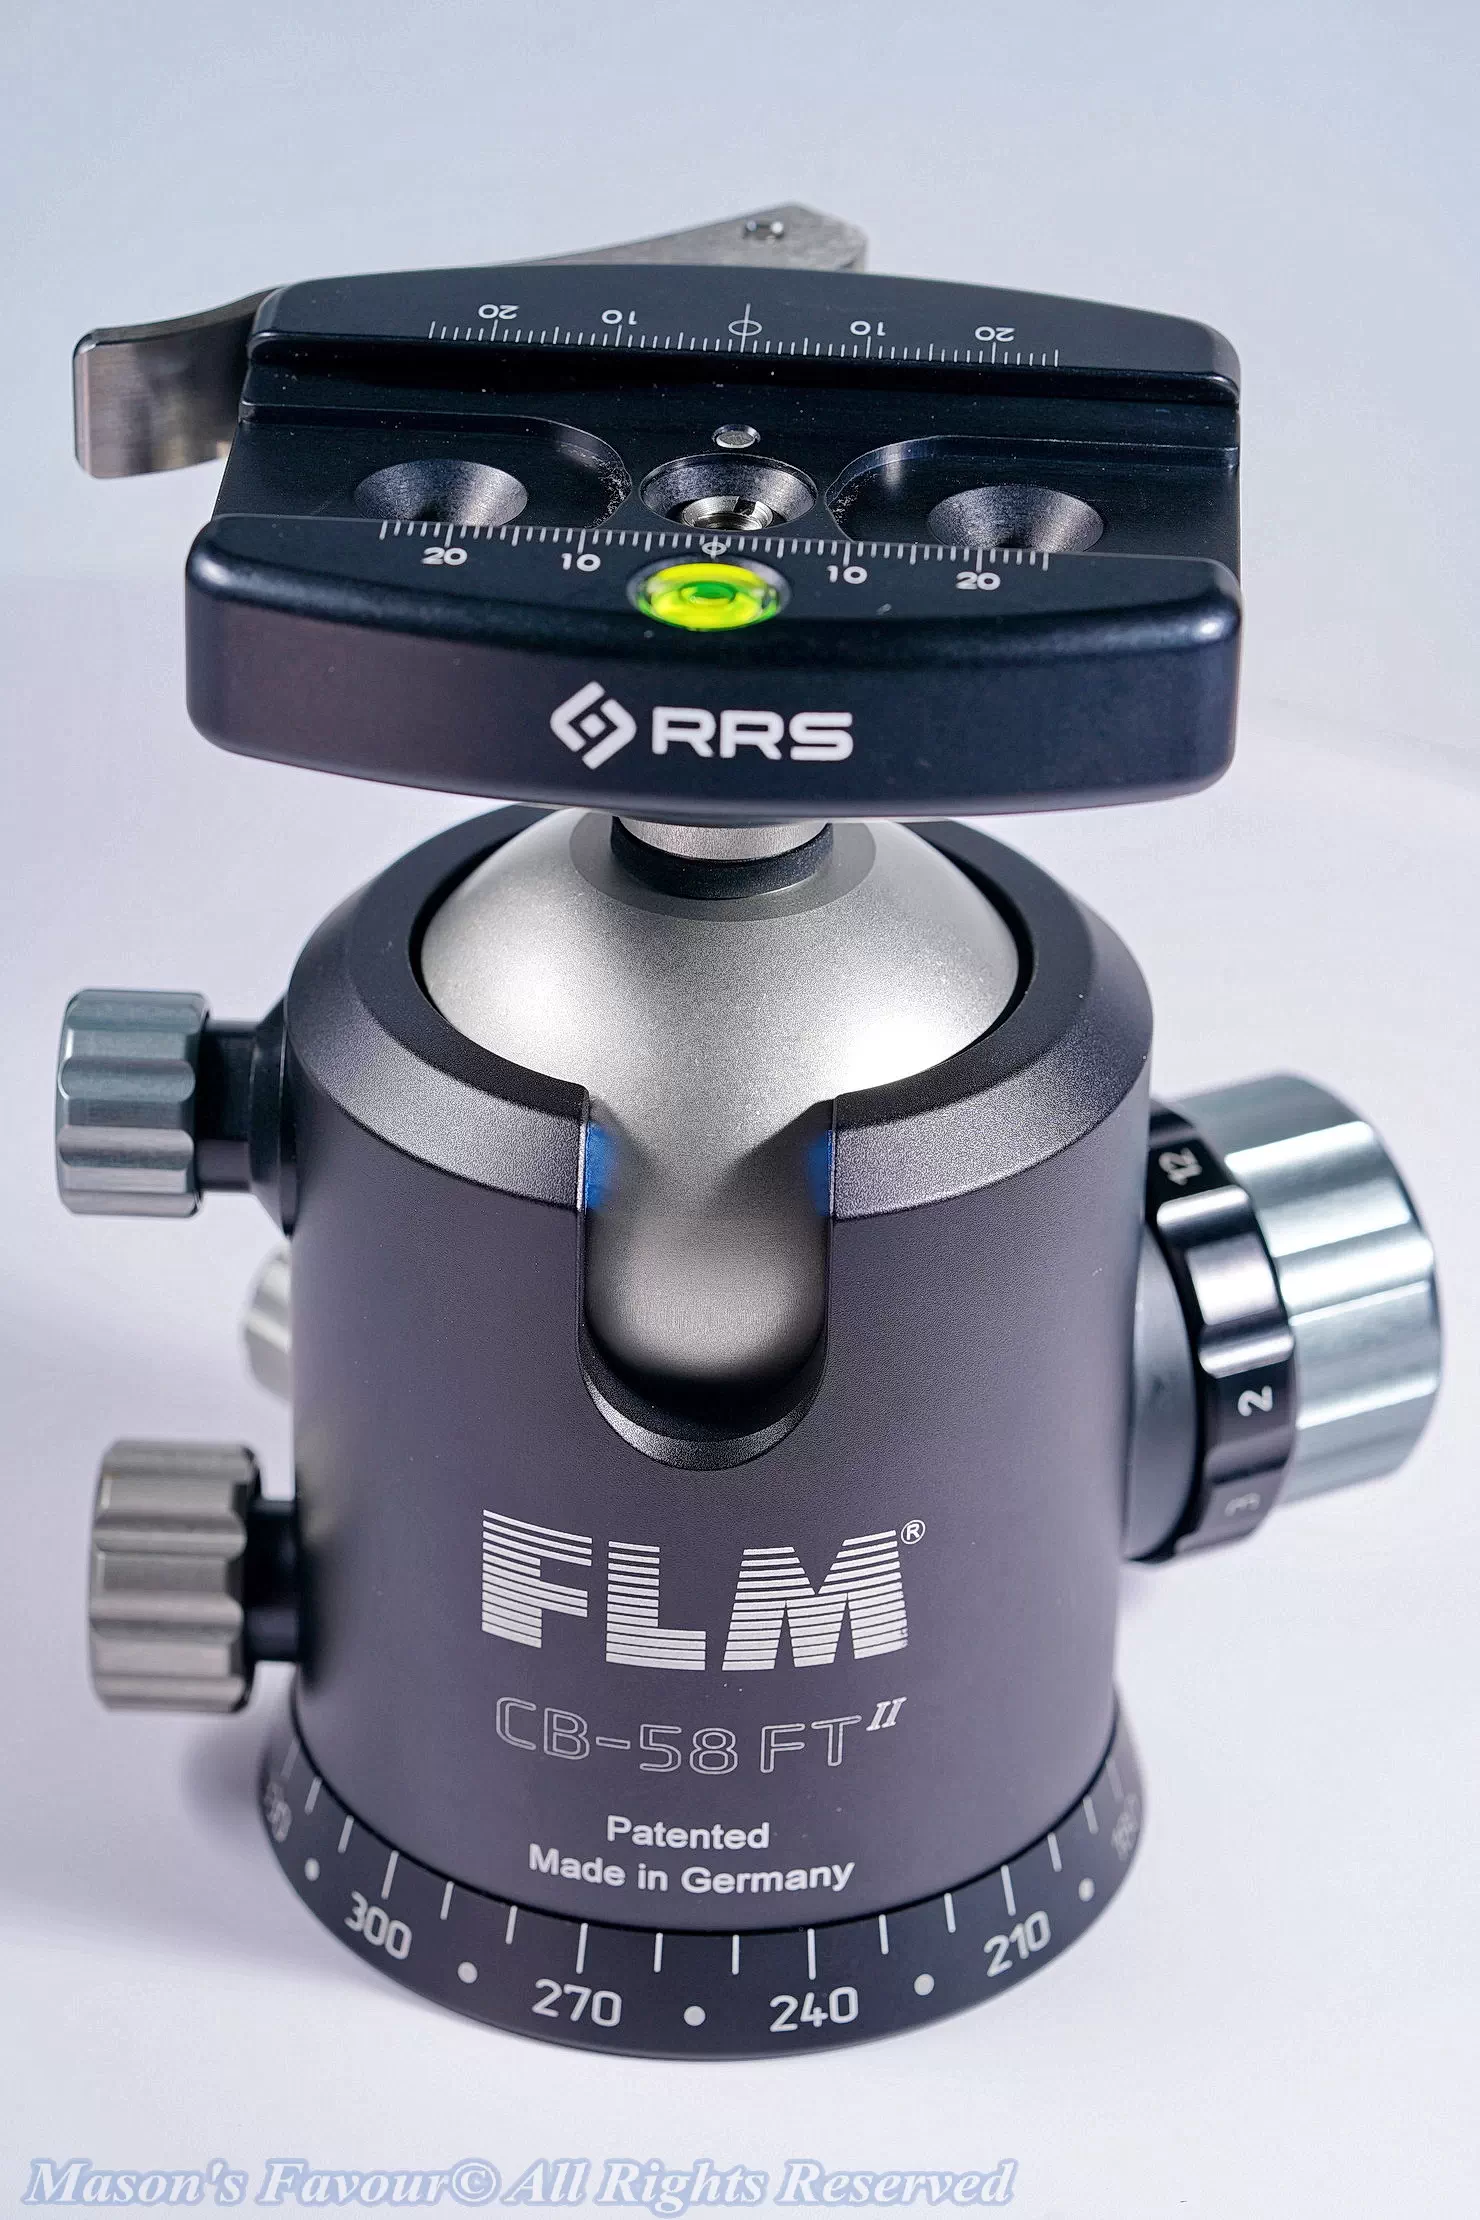 FLM CB-58 FTR II_ with RRS Long Lever Clamp 1